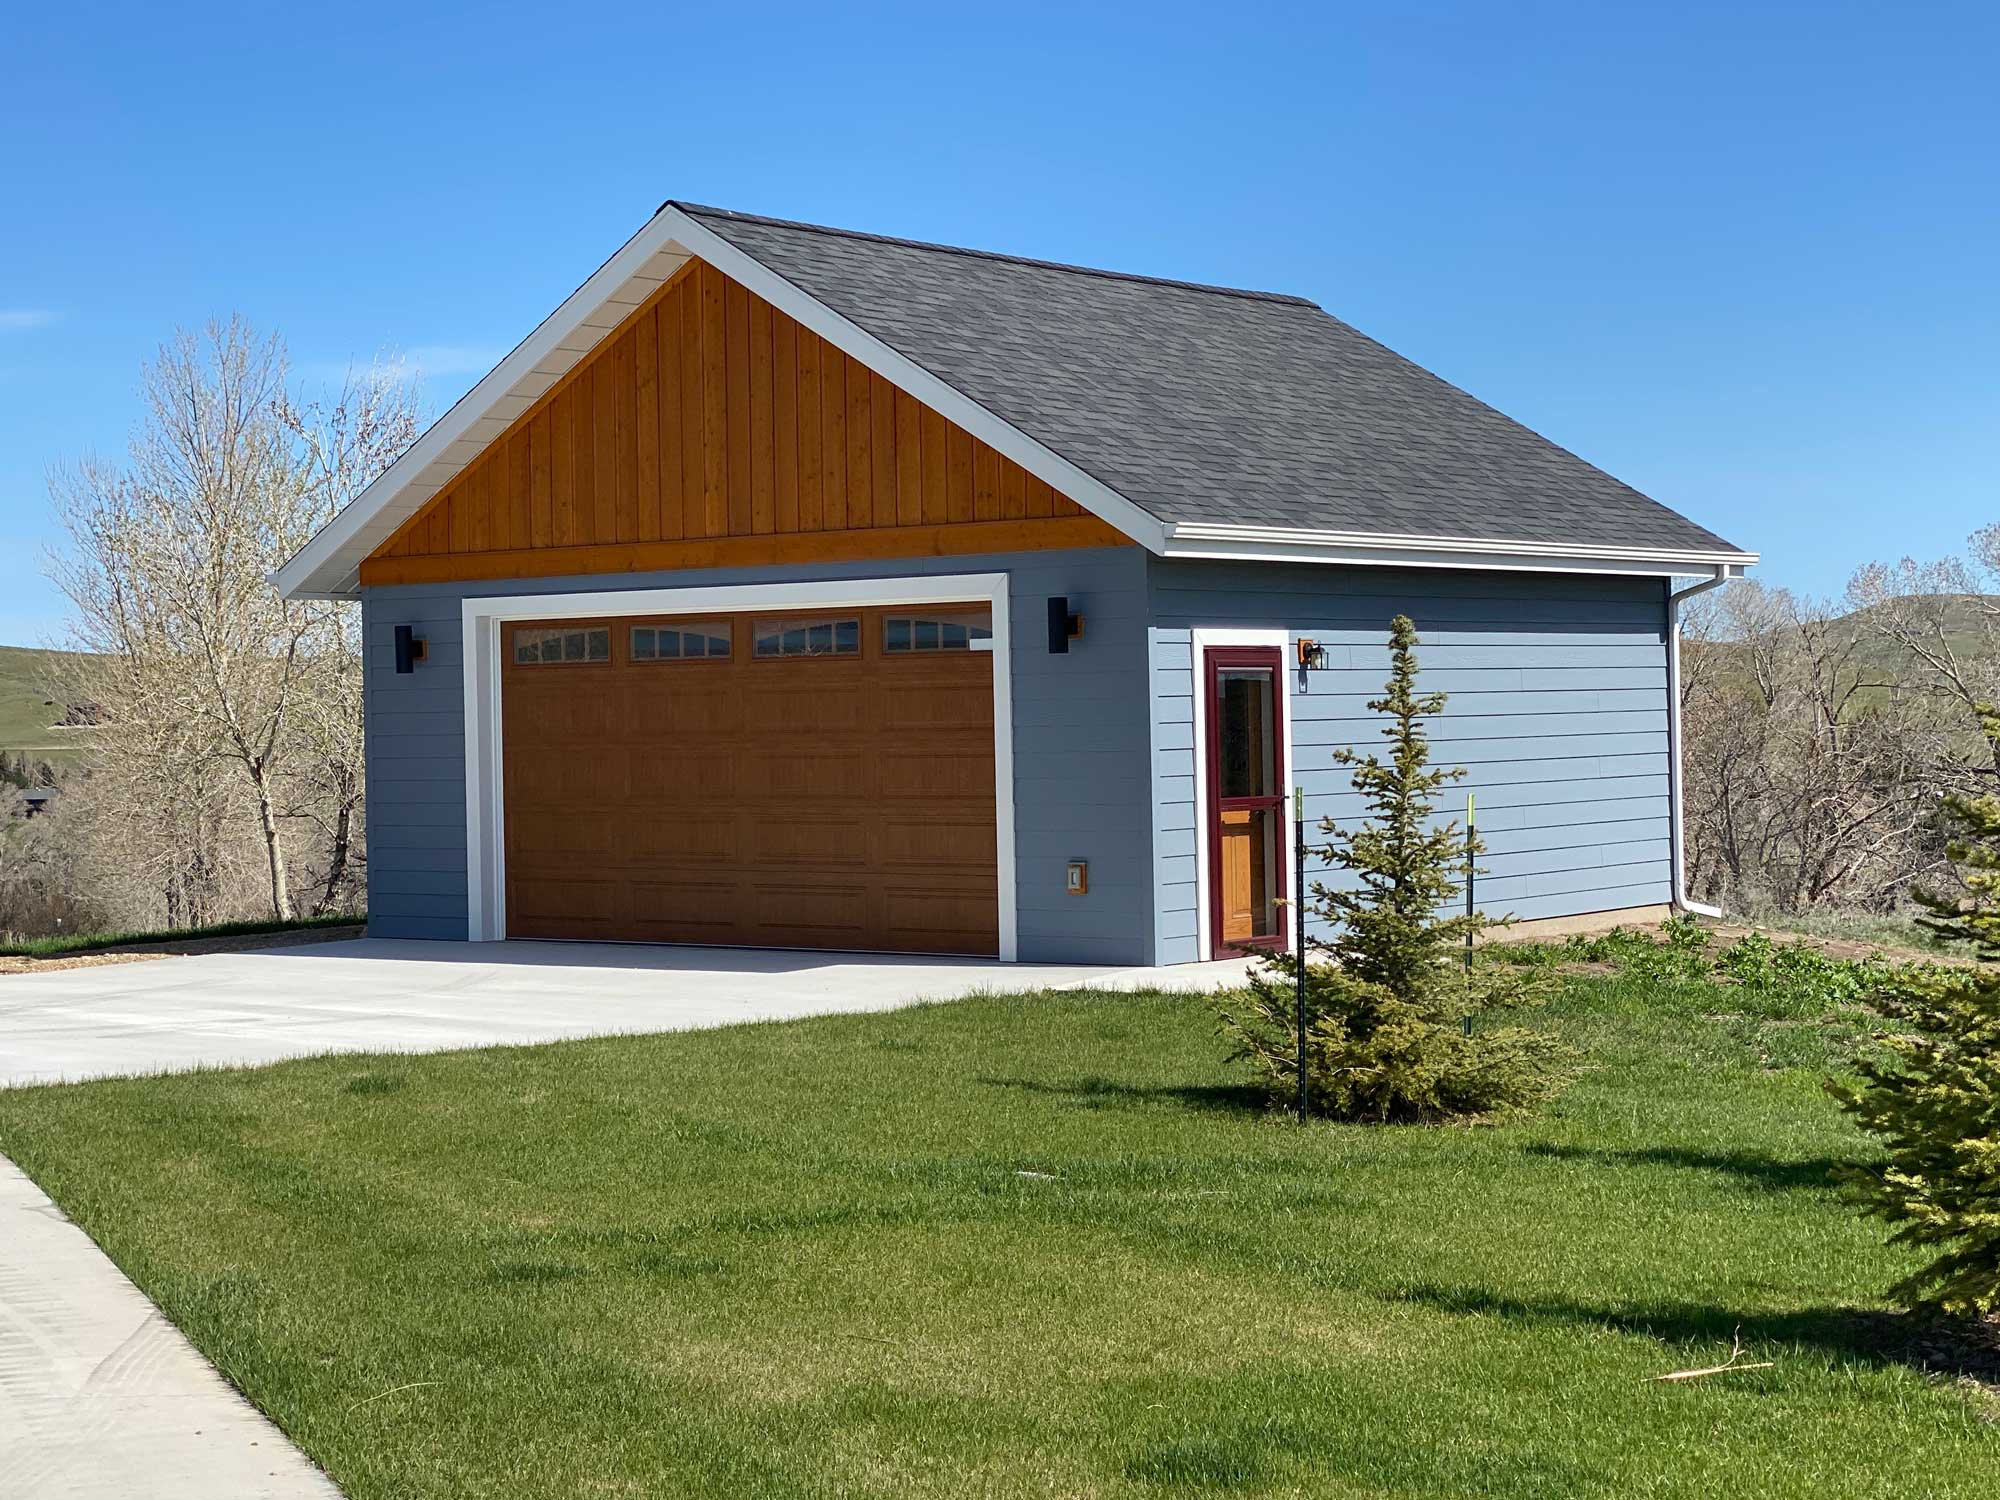 custom home by Cosner construction, Sheridan Wyoming